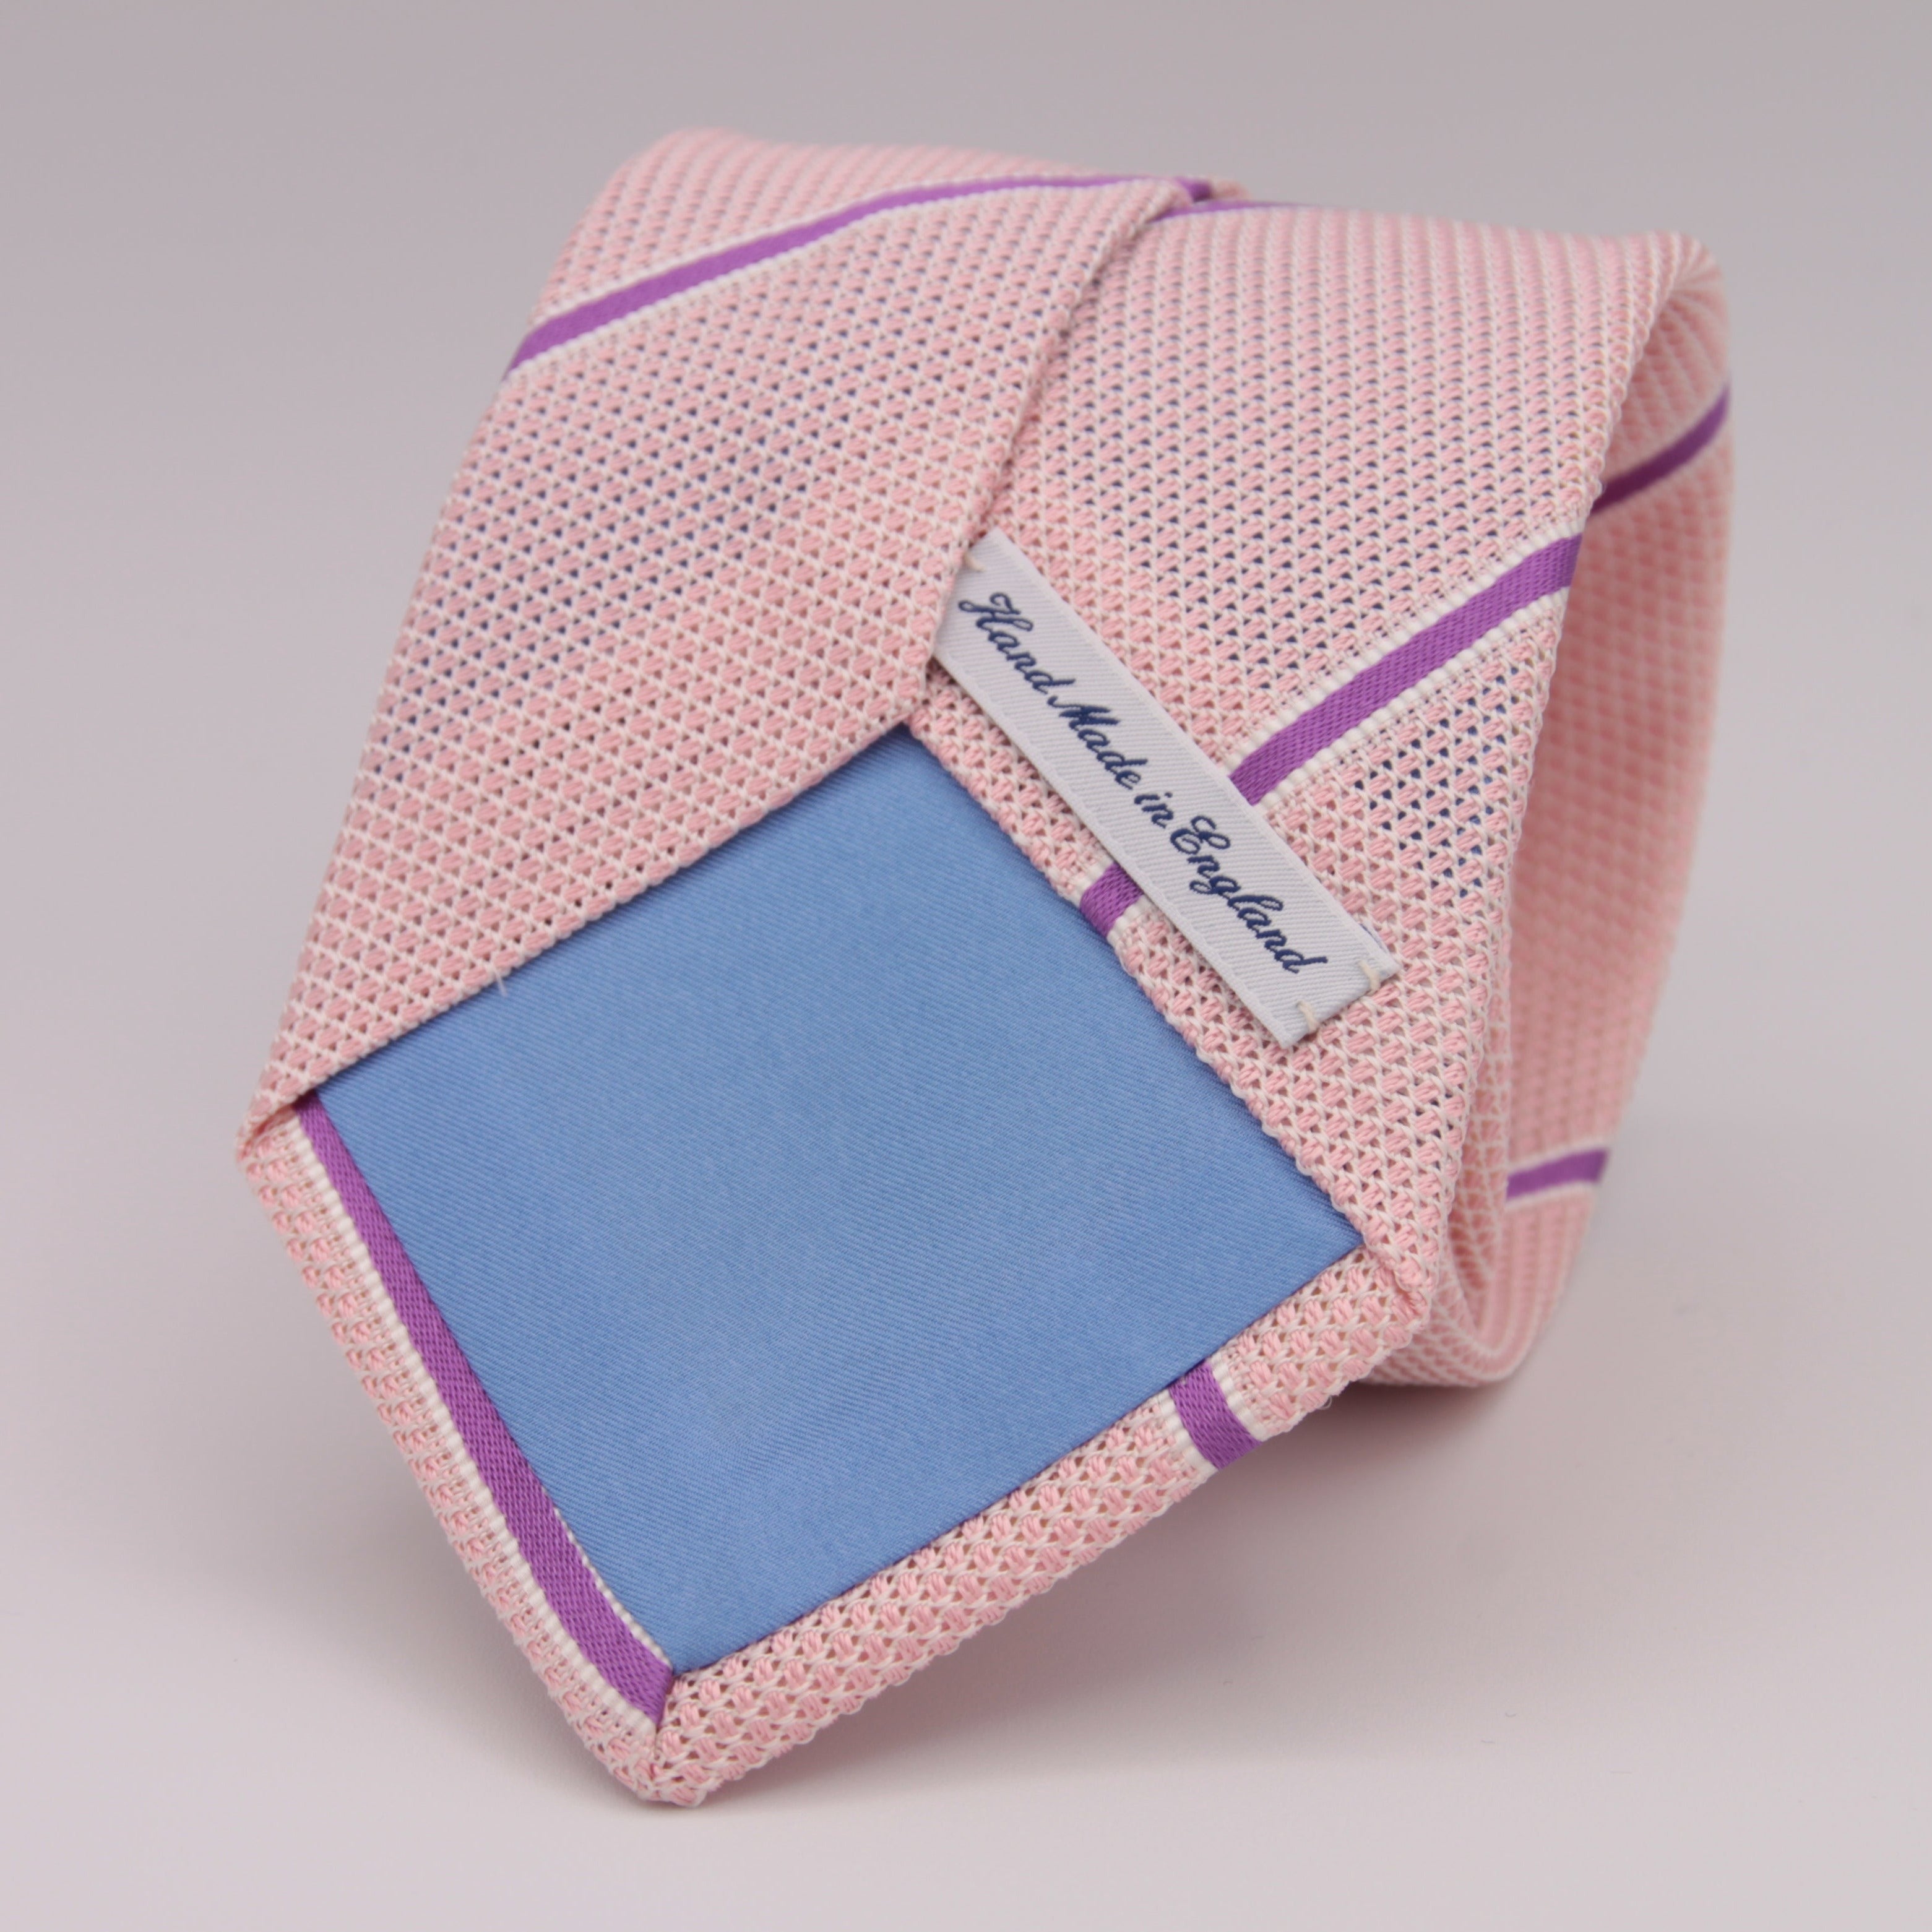 Drake's Archive 100% Silk Garza Piccola Tipped  Light Pink, Purple and White Stripes  Tie Handmade in England 9,5 cm x 146 cm #5322